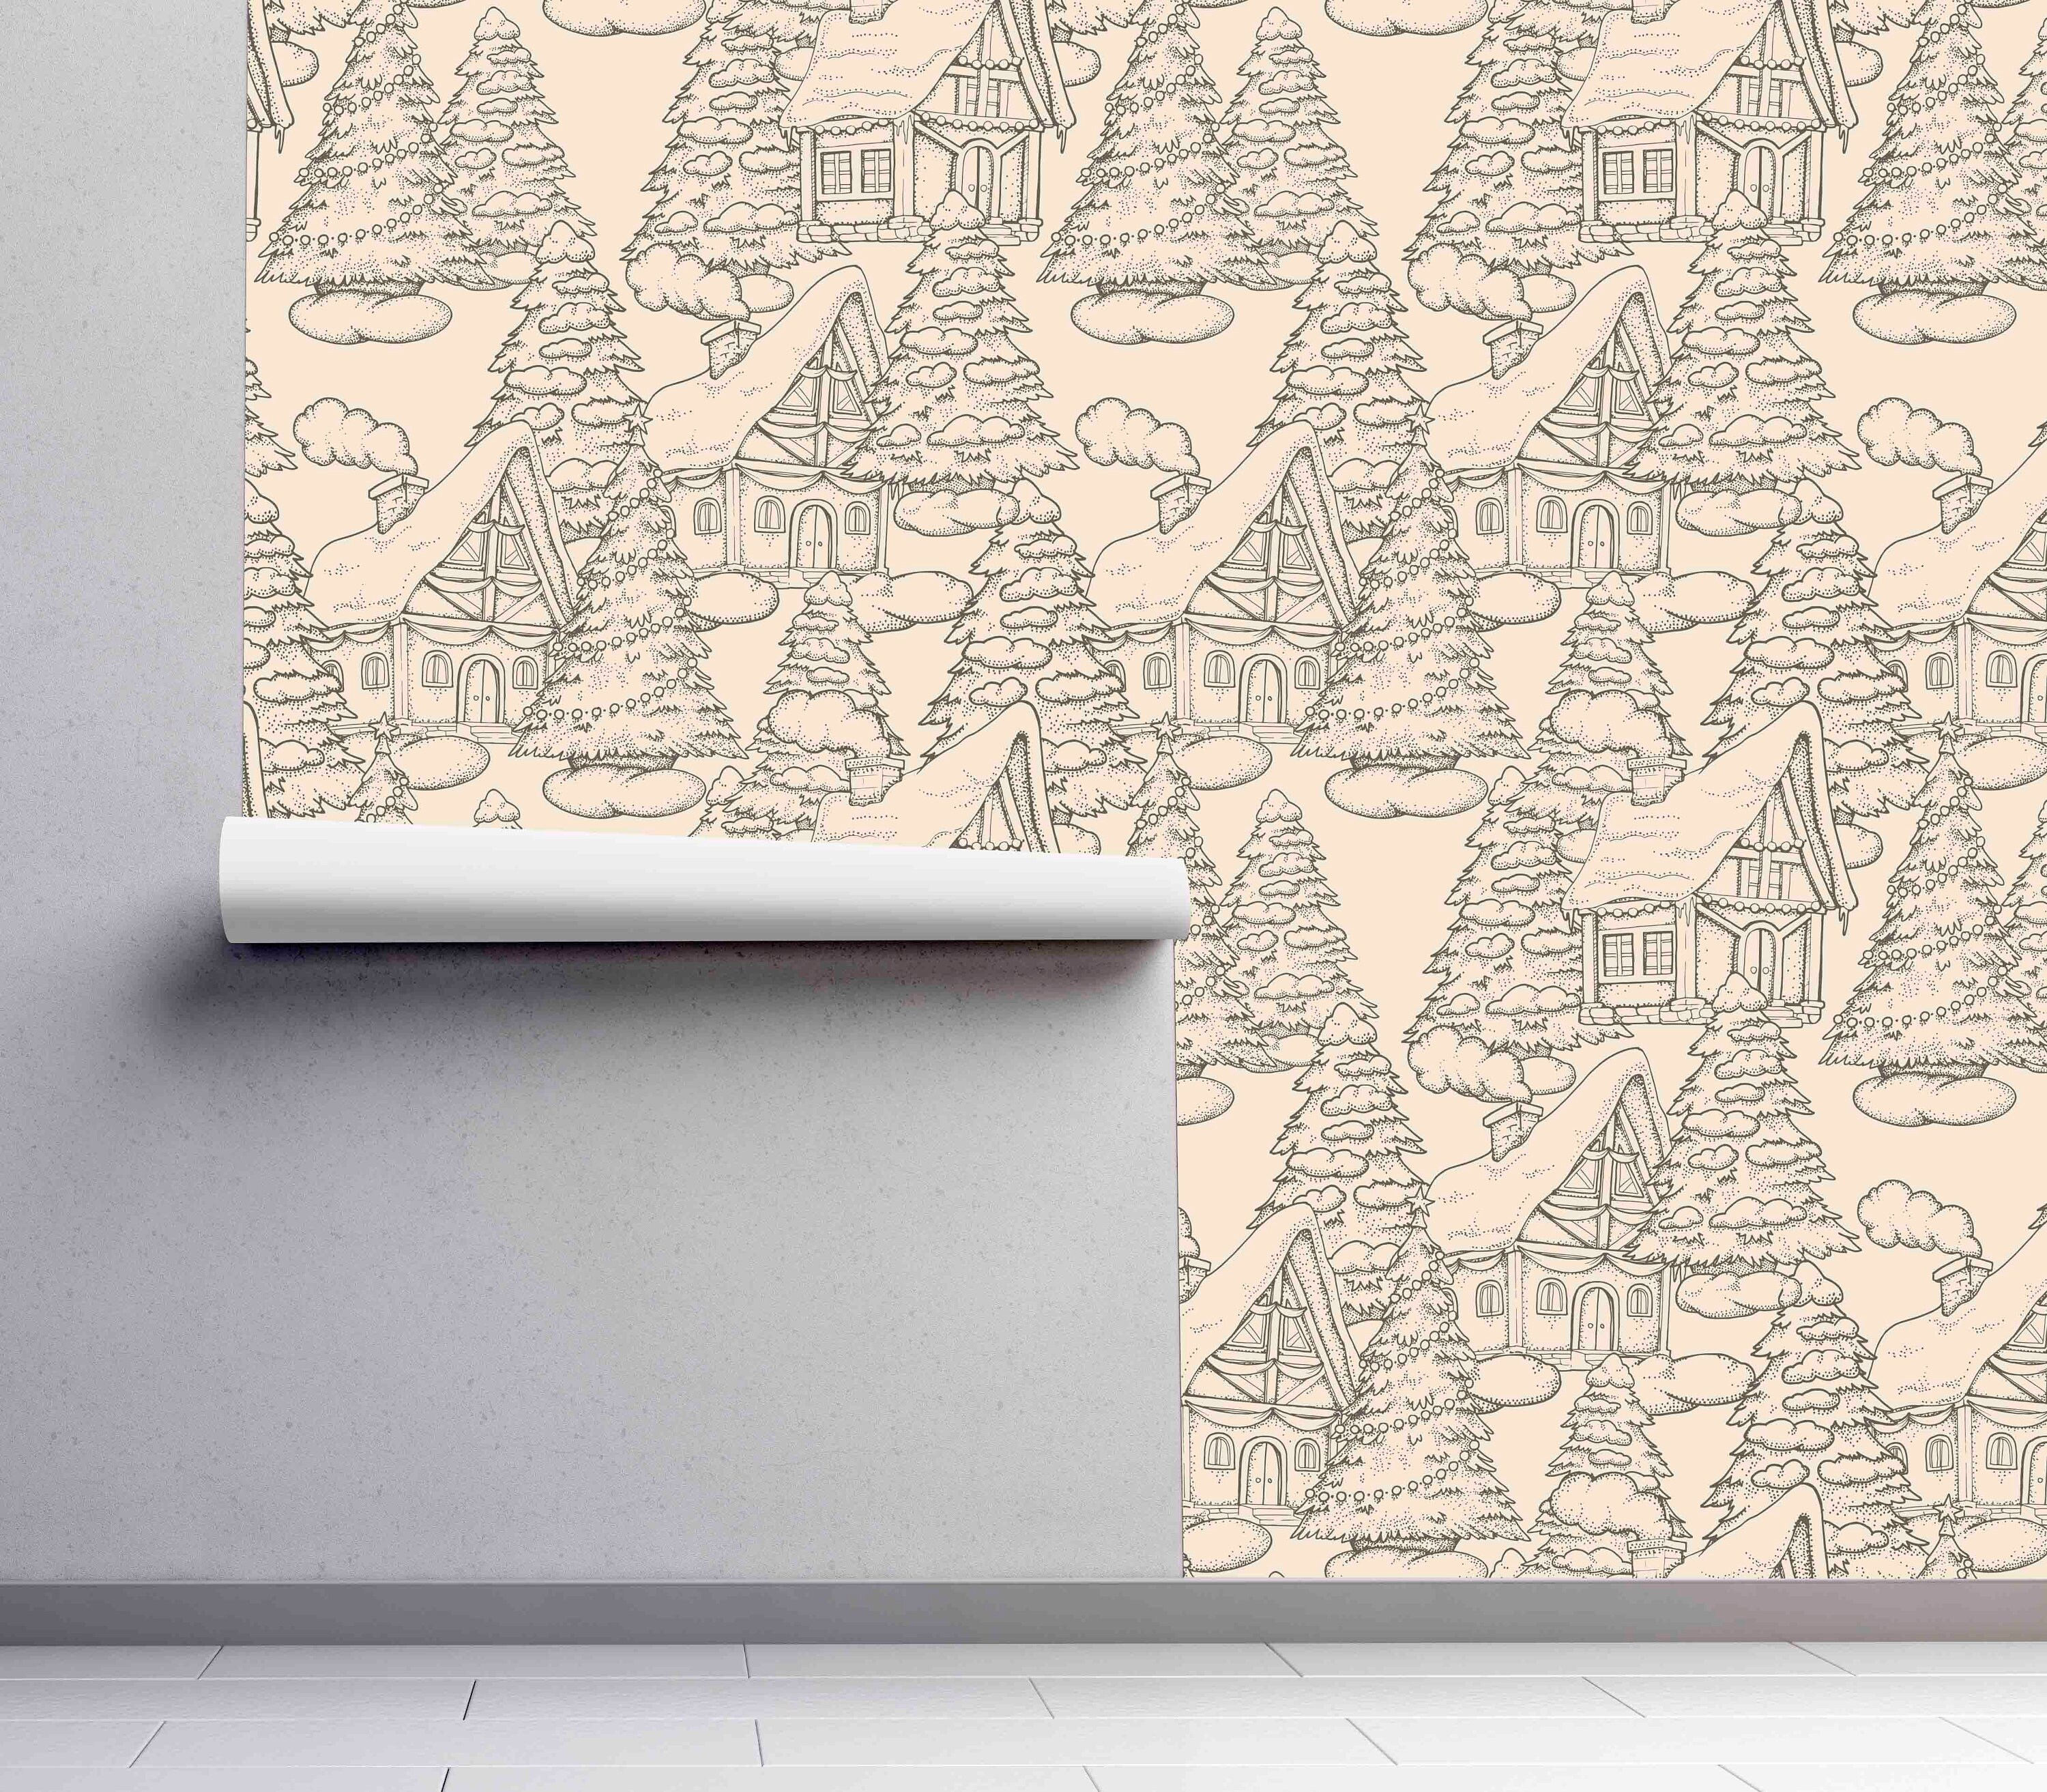 Cozy Winter Homes Removable Wallpaper Seasonal Wallcovering Pre-pasted Wall Murals by WallsHaveSoul Self Adhesive Fabric Peel & Stick